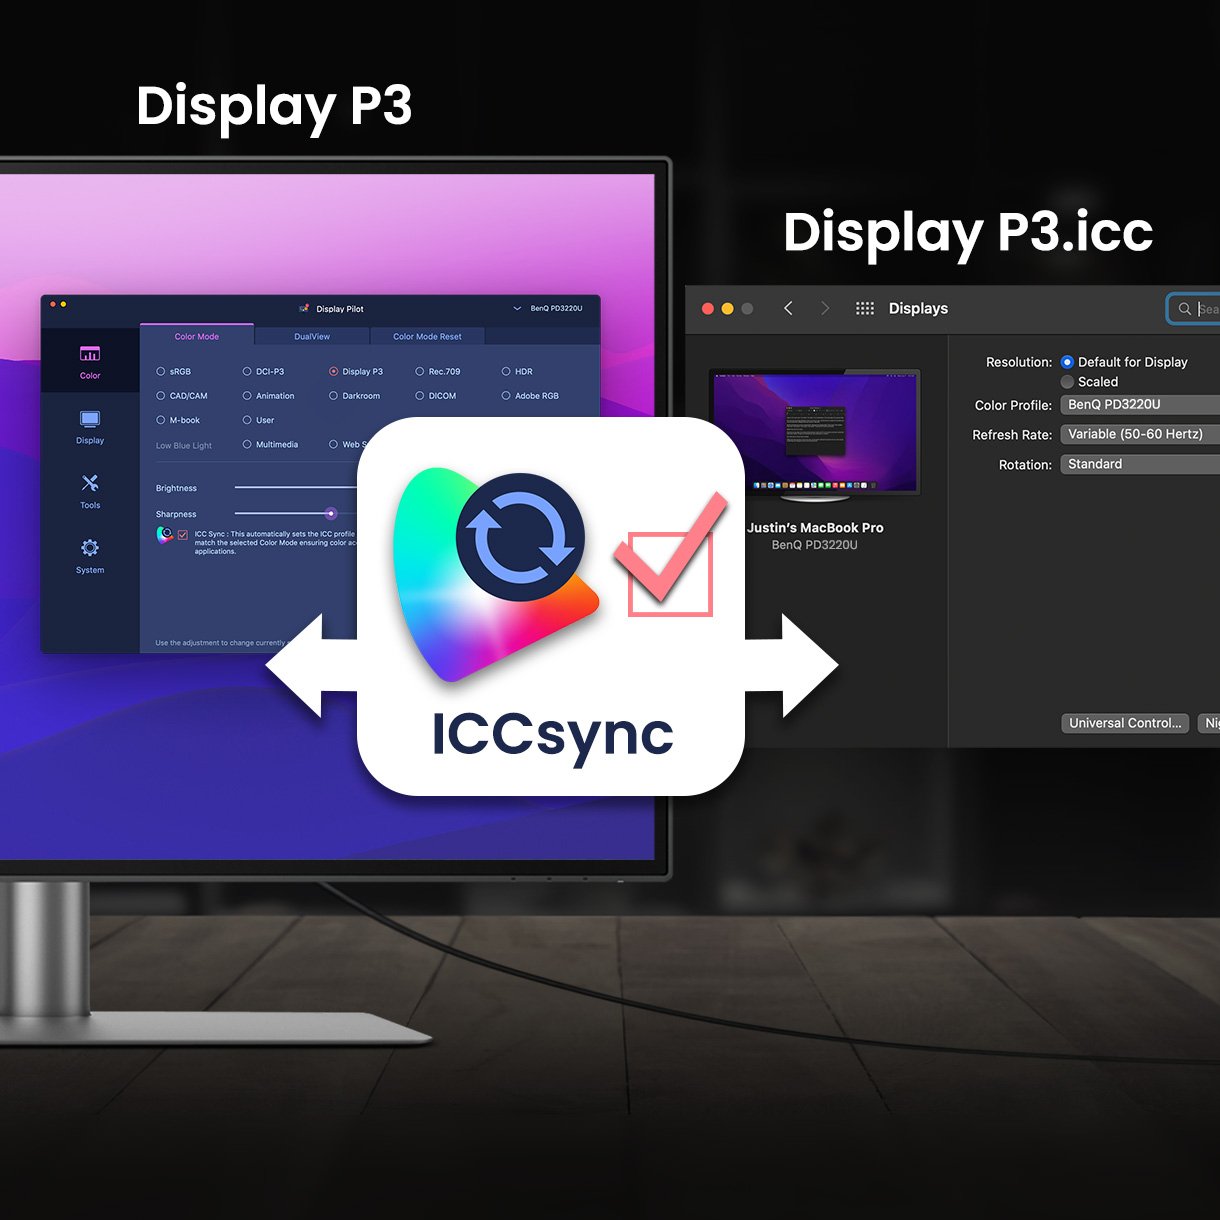 With ICC profile compatibility, BenQ ICCsync makes it easy to sync in just a second by one click via BenQ Display Pilot.